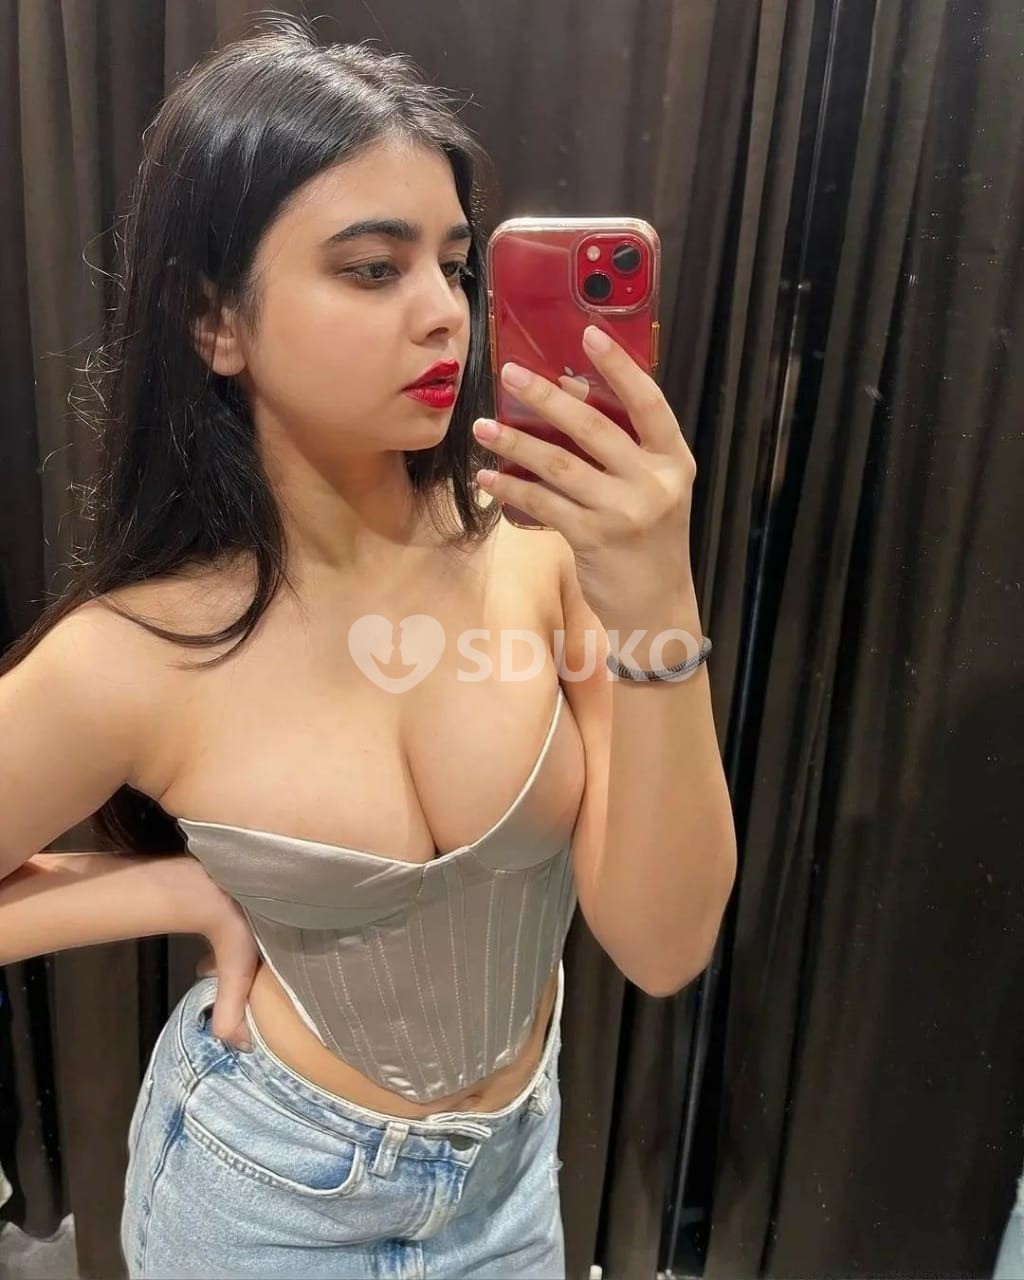 GREATER NOIDA VIP TODAY 🔅🌜LOW PRICE ESCORT 🥰SERVICE 100% SAFE AND SECURE ANYTIME CALL ME 24 X 7 SERVICE AVAILAB